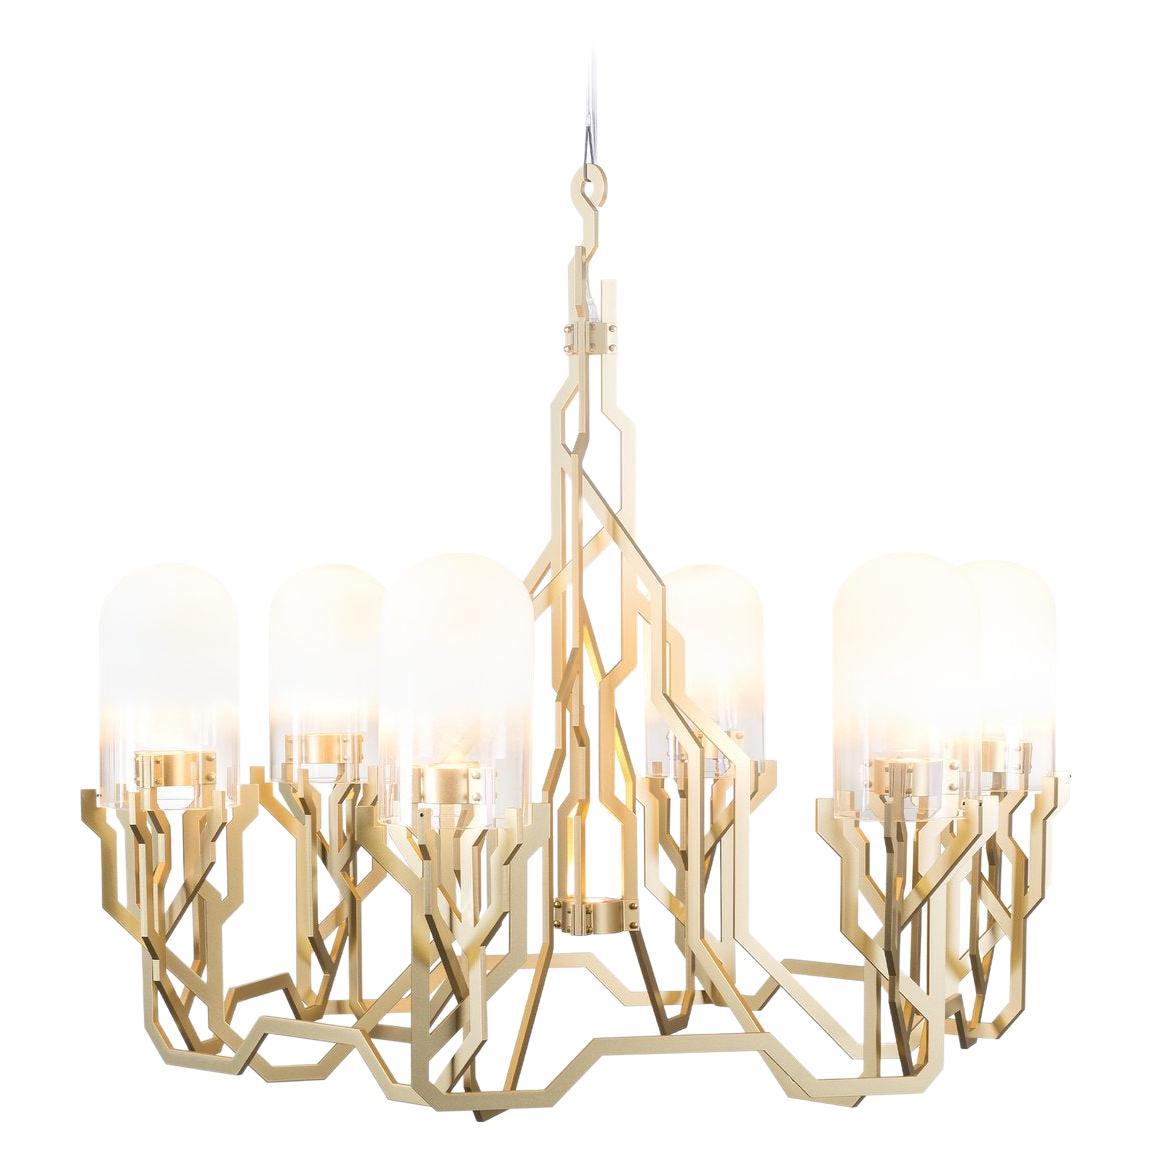 Moooi Plant Chandelier in Steel Frame with Glass Diffuser by Kranen/Gille, 10m